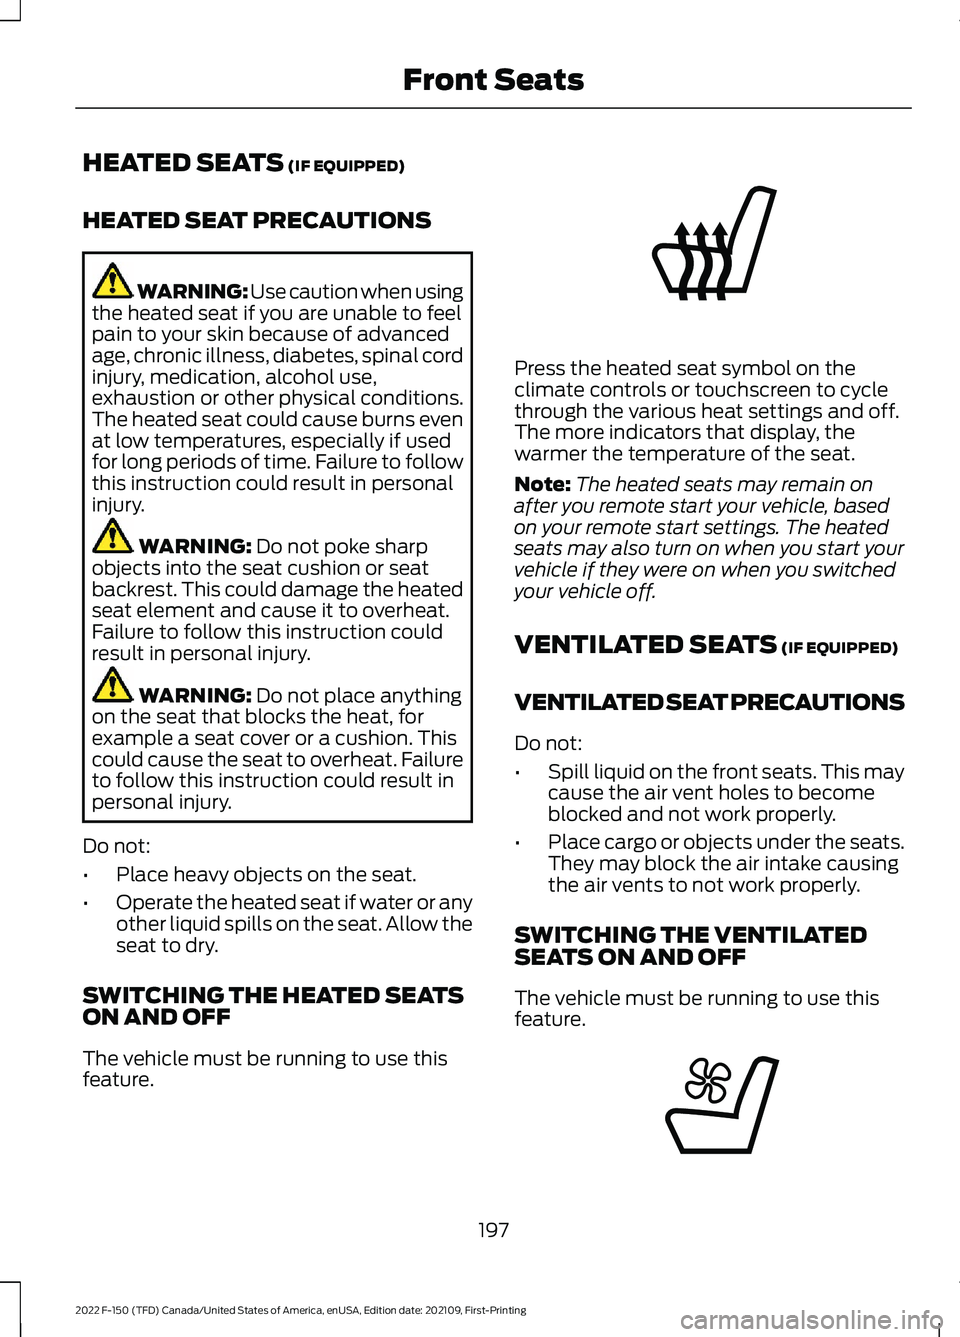 FORD F-150 2022 User Guide HEATED SEATS (IF EQUIPPED)
HEATED SEAT PRECAUTIONS WARNING: Use caution when using
the heated seat if you are unable to feel
pain to your skin because of advanced
age, chronic illness, diabetes, spina